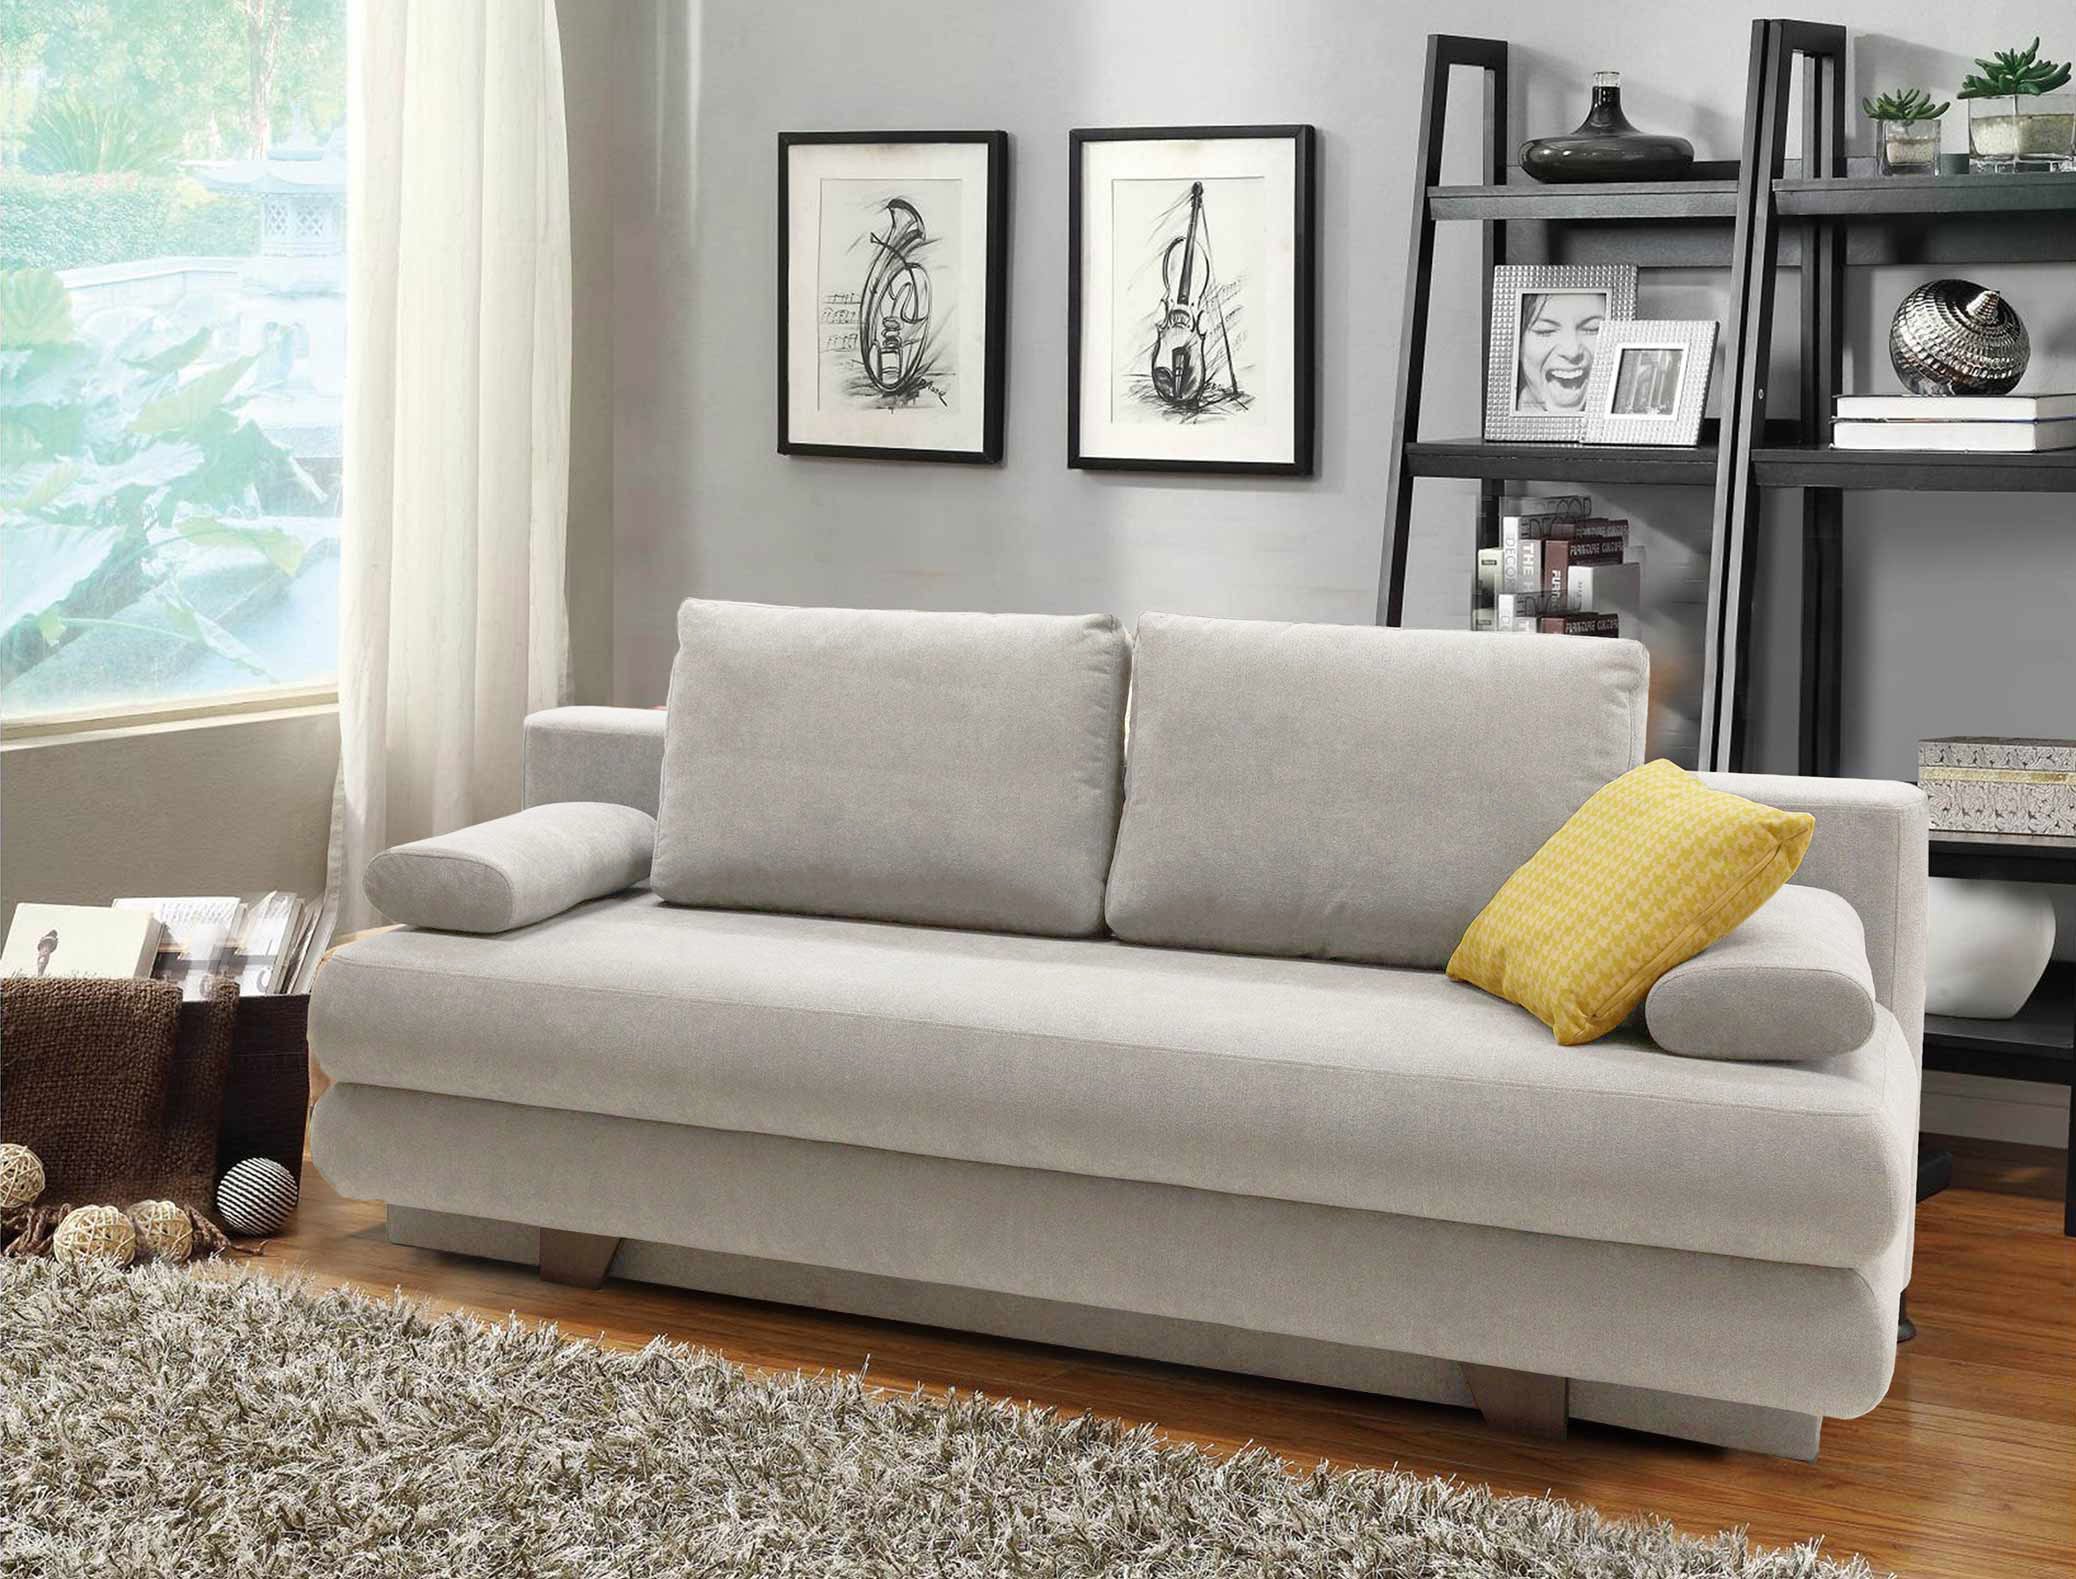 Lagoon Sofa Bed Sleeper (Queen Size) Perfect Light Gray by Prestige  Furnishings